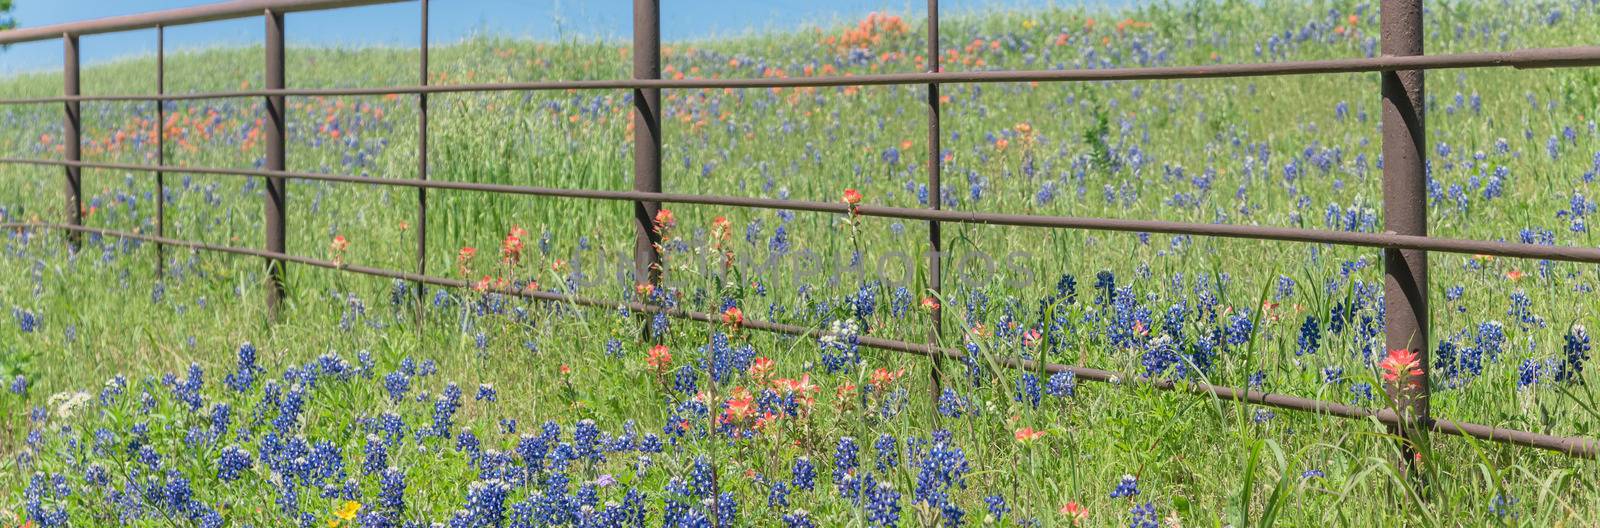 Panoramic view Indian Paintbrush and Bluebonnet blooming along old metal fence by trongnguyen